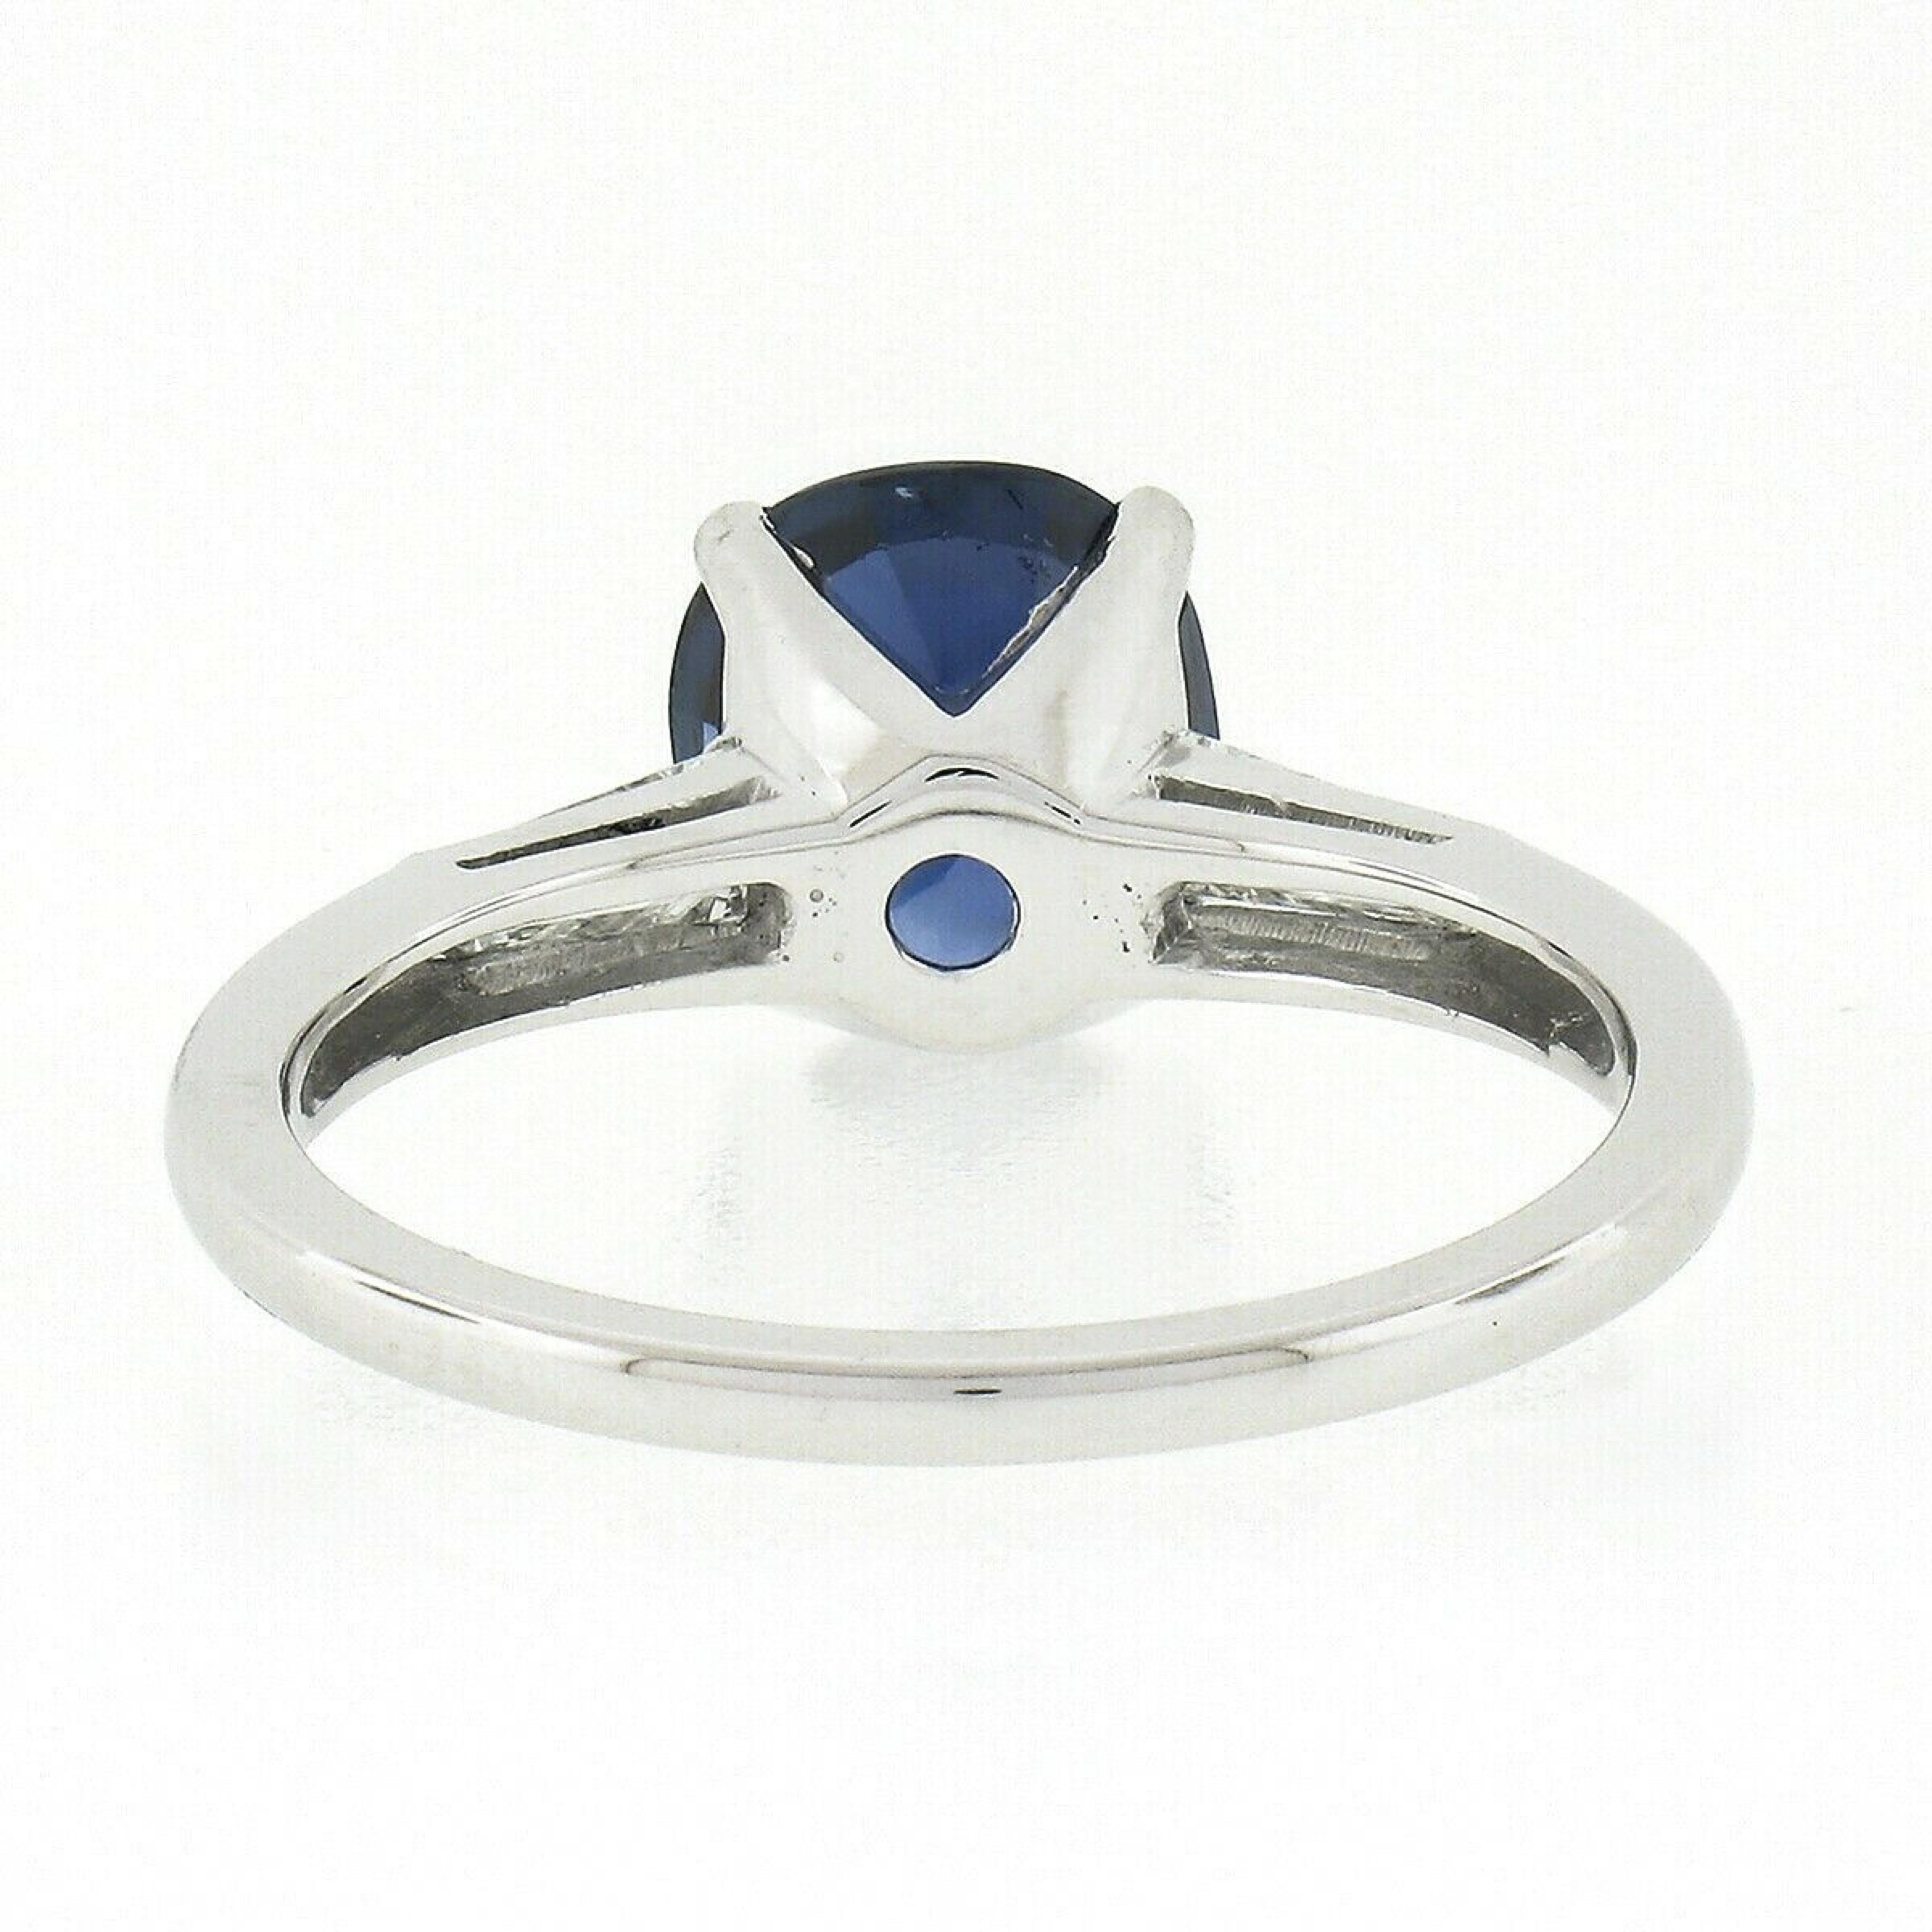 Handmade Platinum Certified Oval Sapphire & Baguette Diamond Engagement Ring In Good Condition For Sale In Montclair, NJ